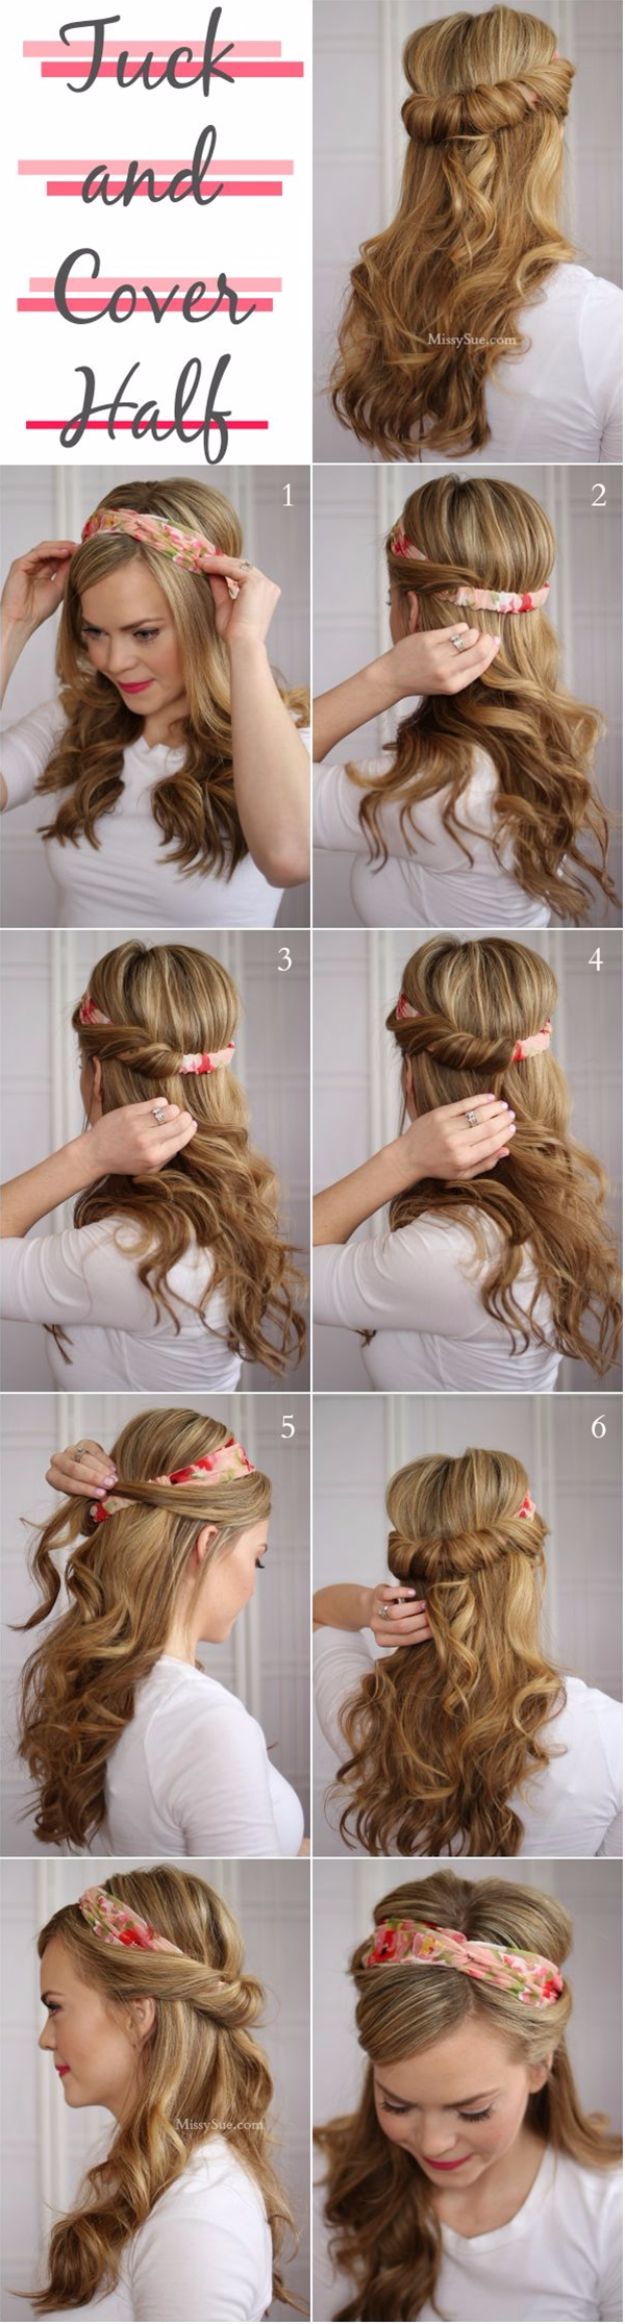 Tuck-and-Cover-Half-Up-Hairstyle